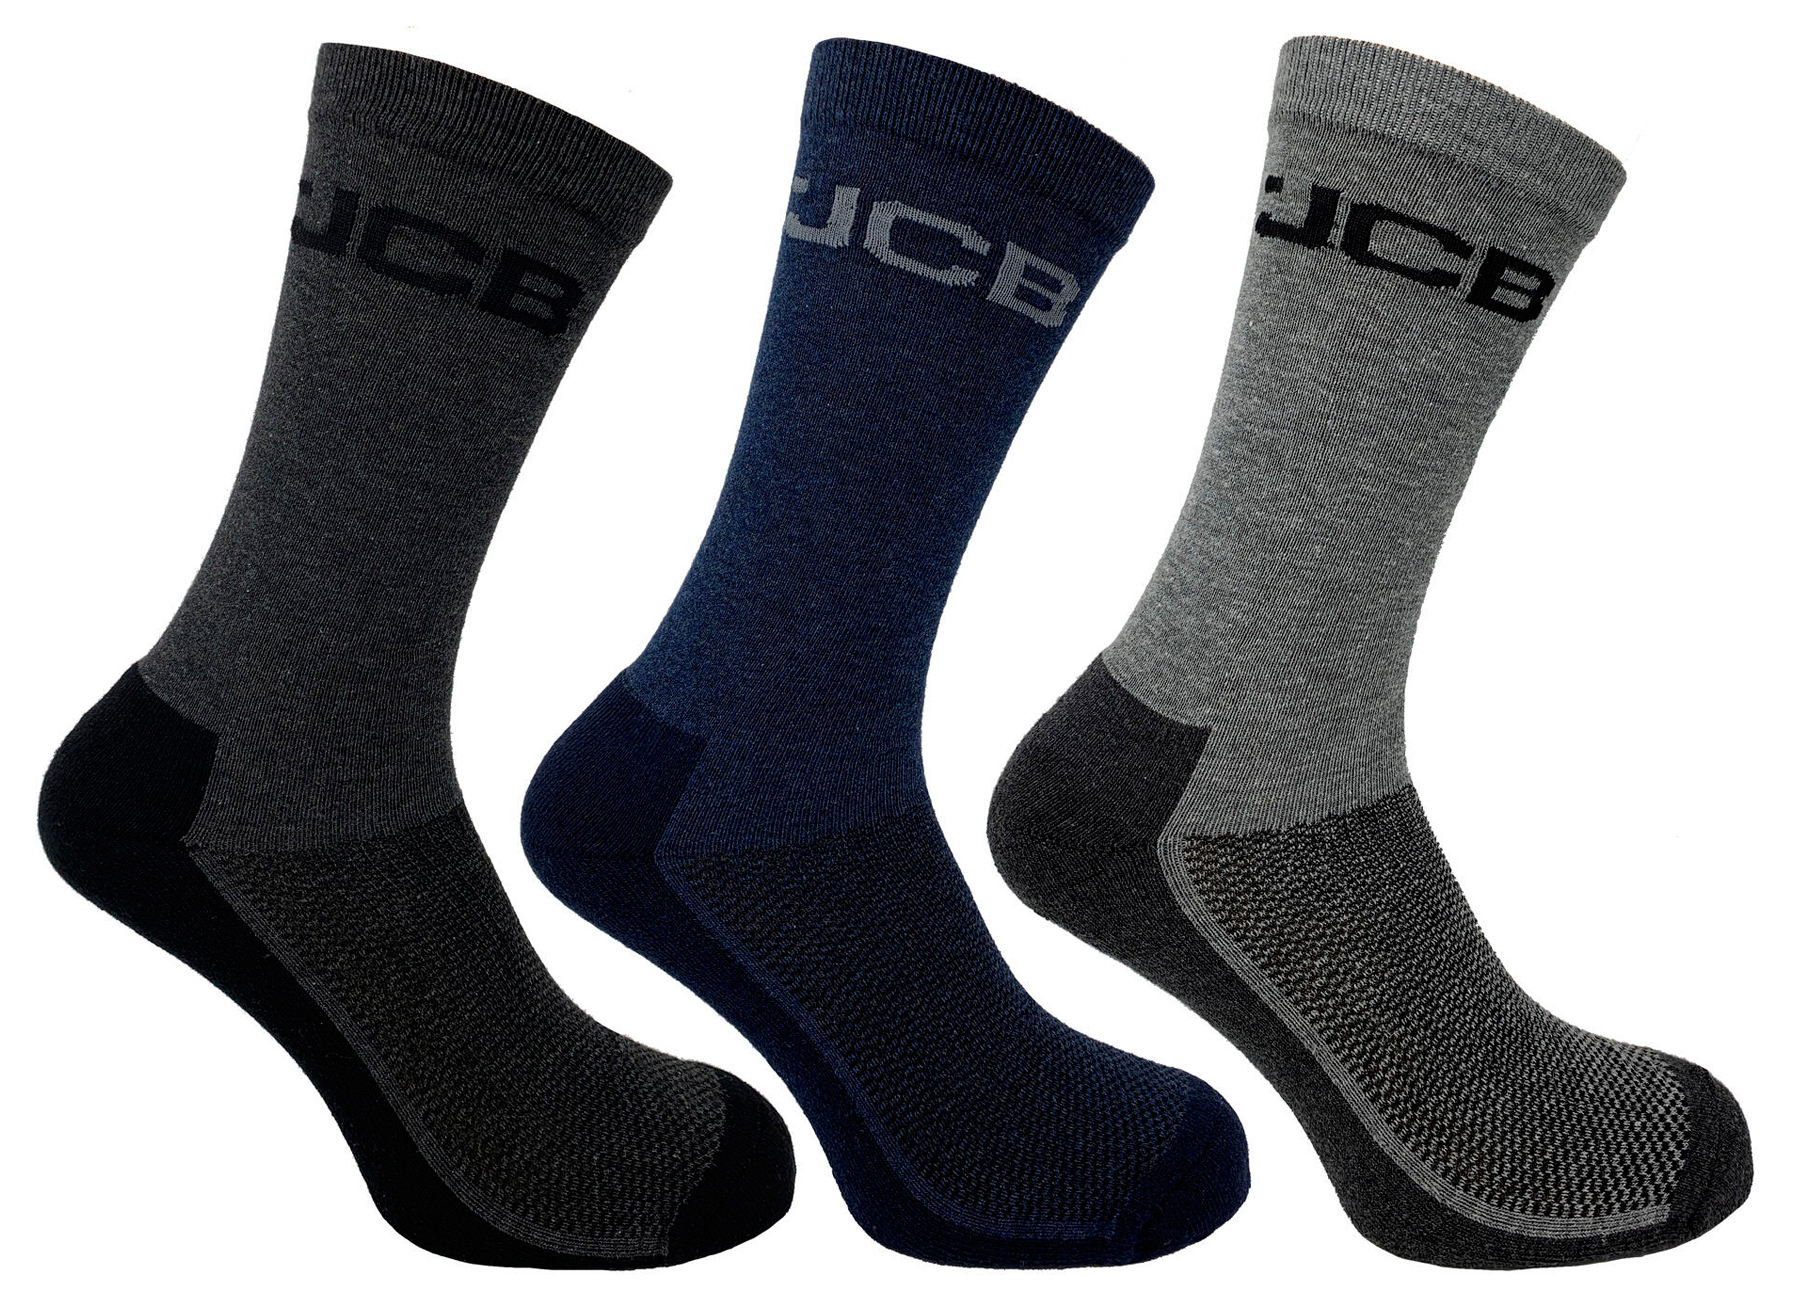 JCB CHAUSSETTES DE TRAVAIL EVERY DAY 3-PACK 39-43